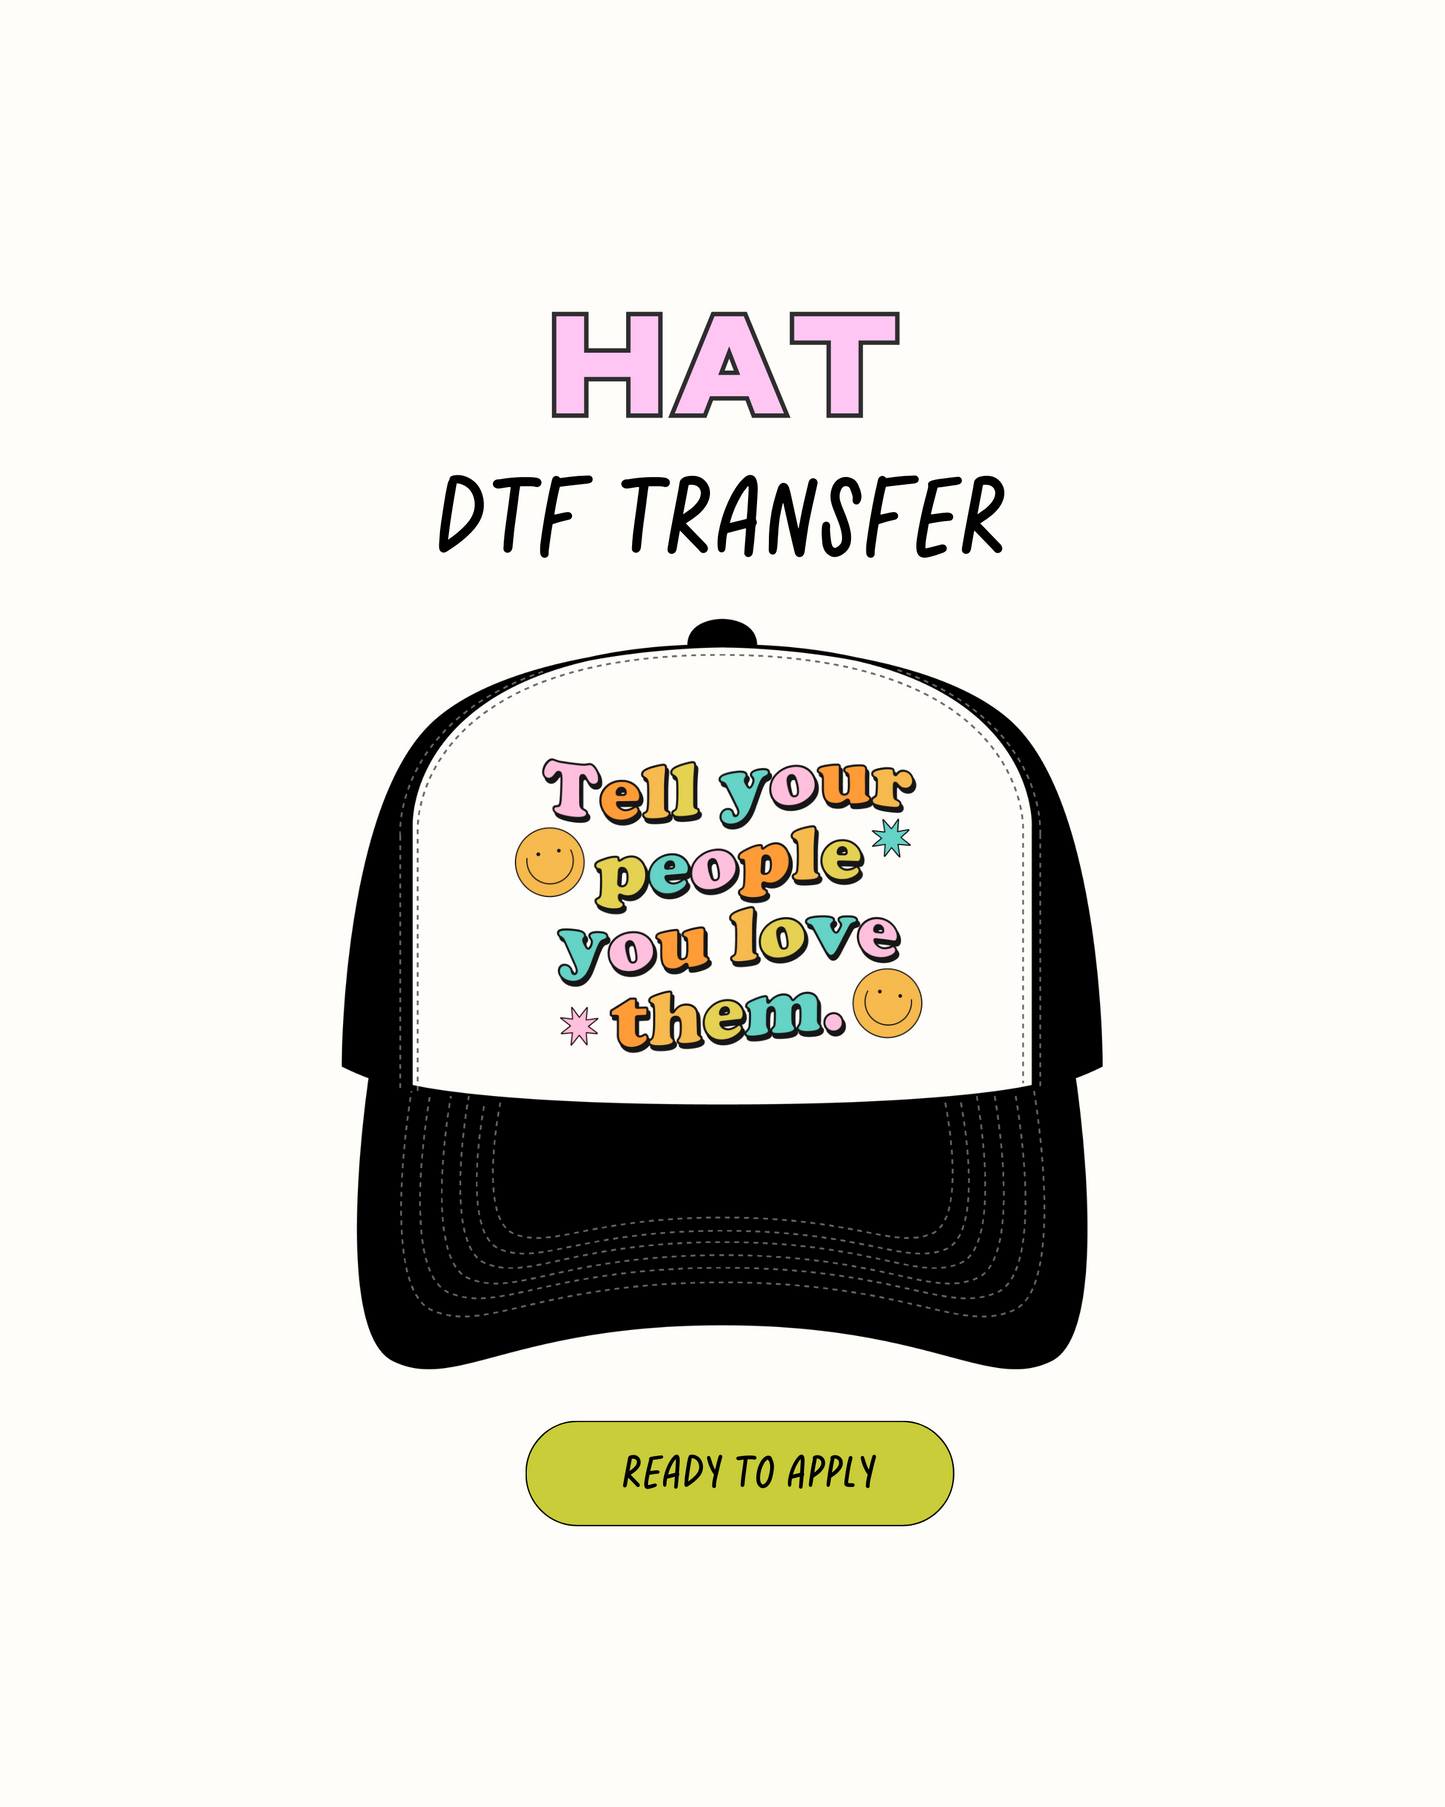 tell your people you love them - DTF Hat Transfers